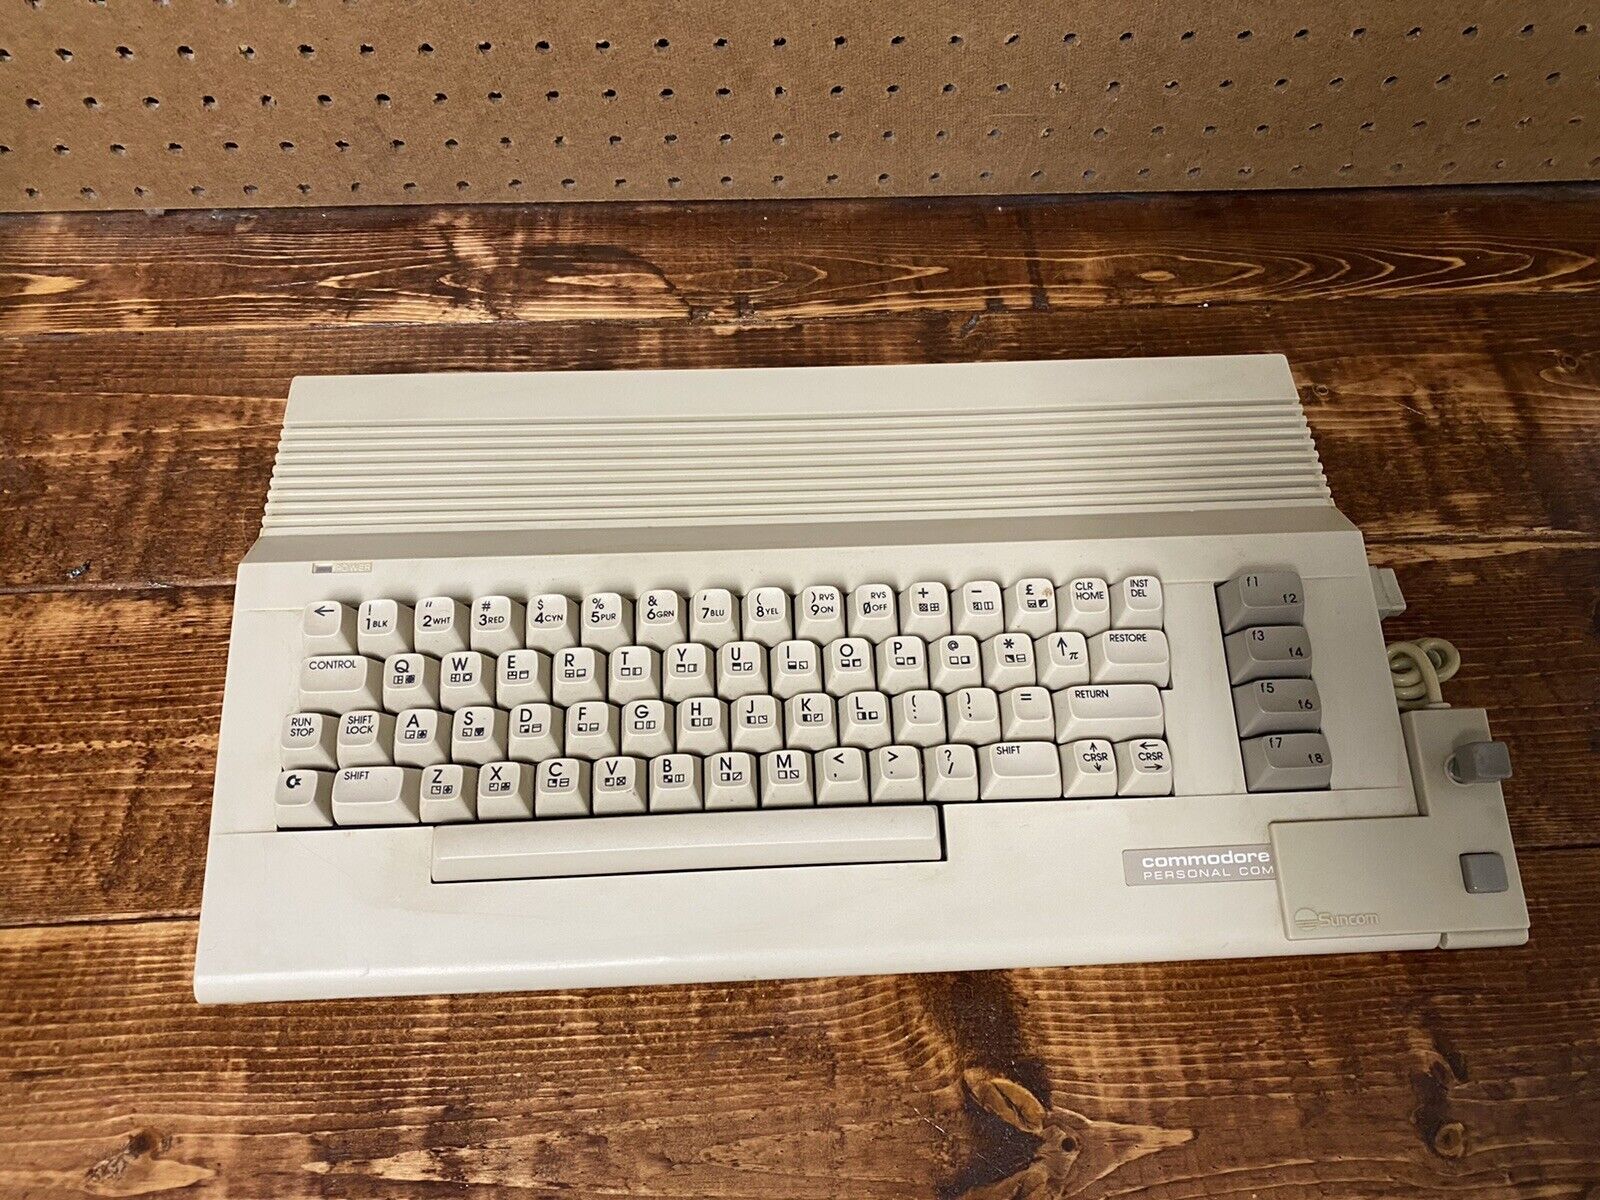 Vintage Commodore 64 Keyboard Computer With Suncom Joystick Video Game